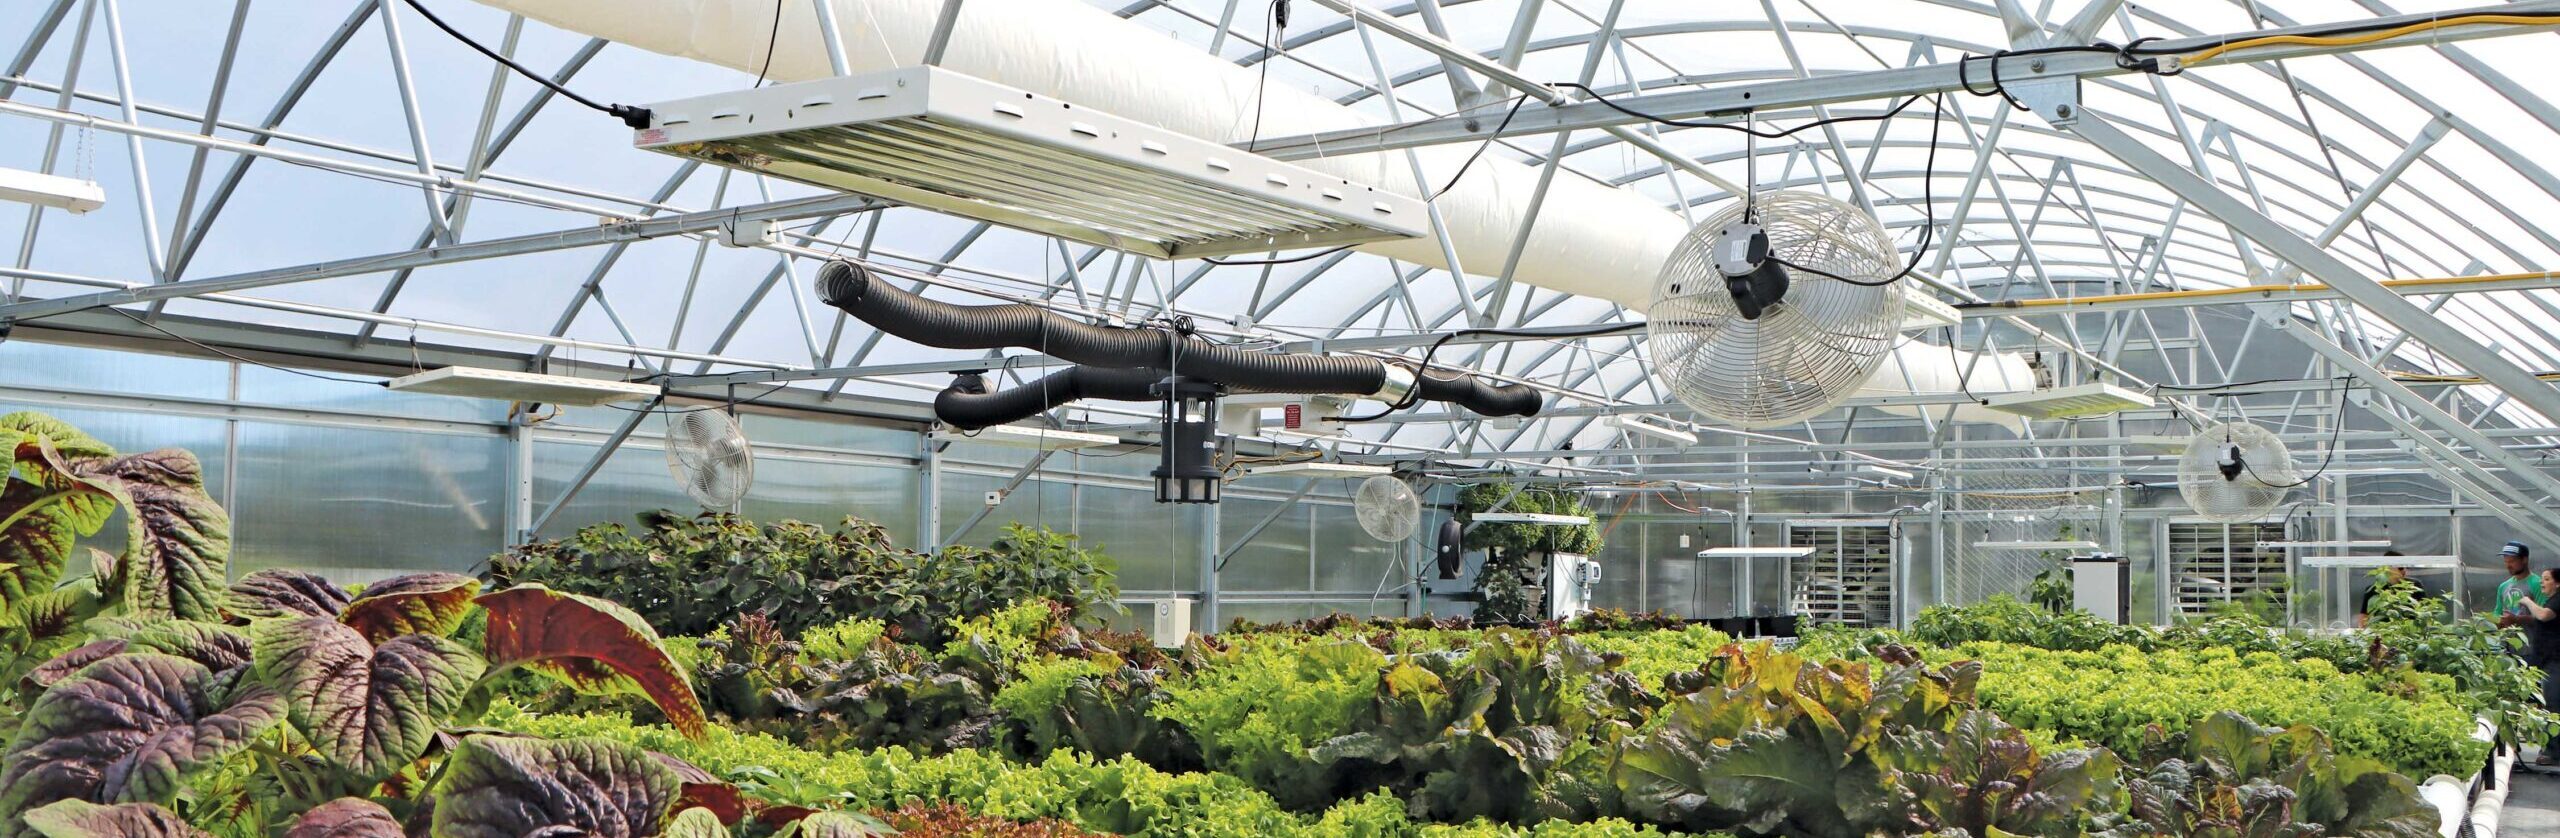 inside greenhouse with hydroponic plants and overhead accessories